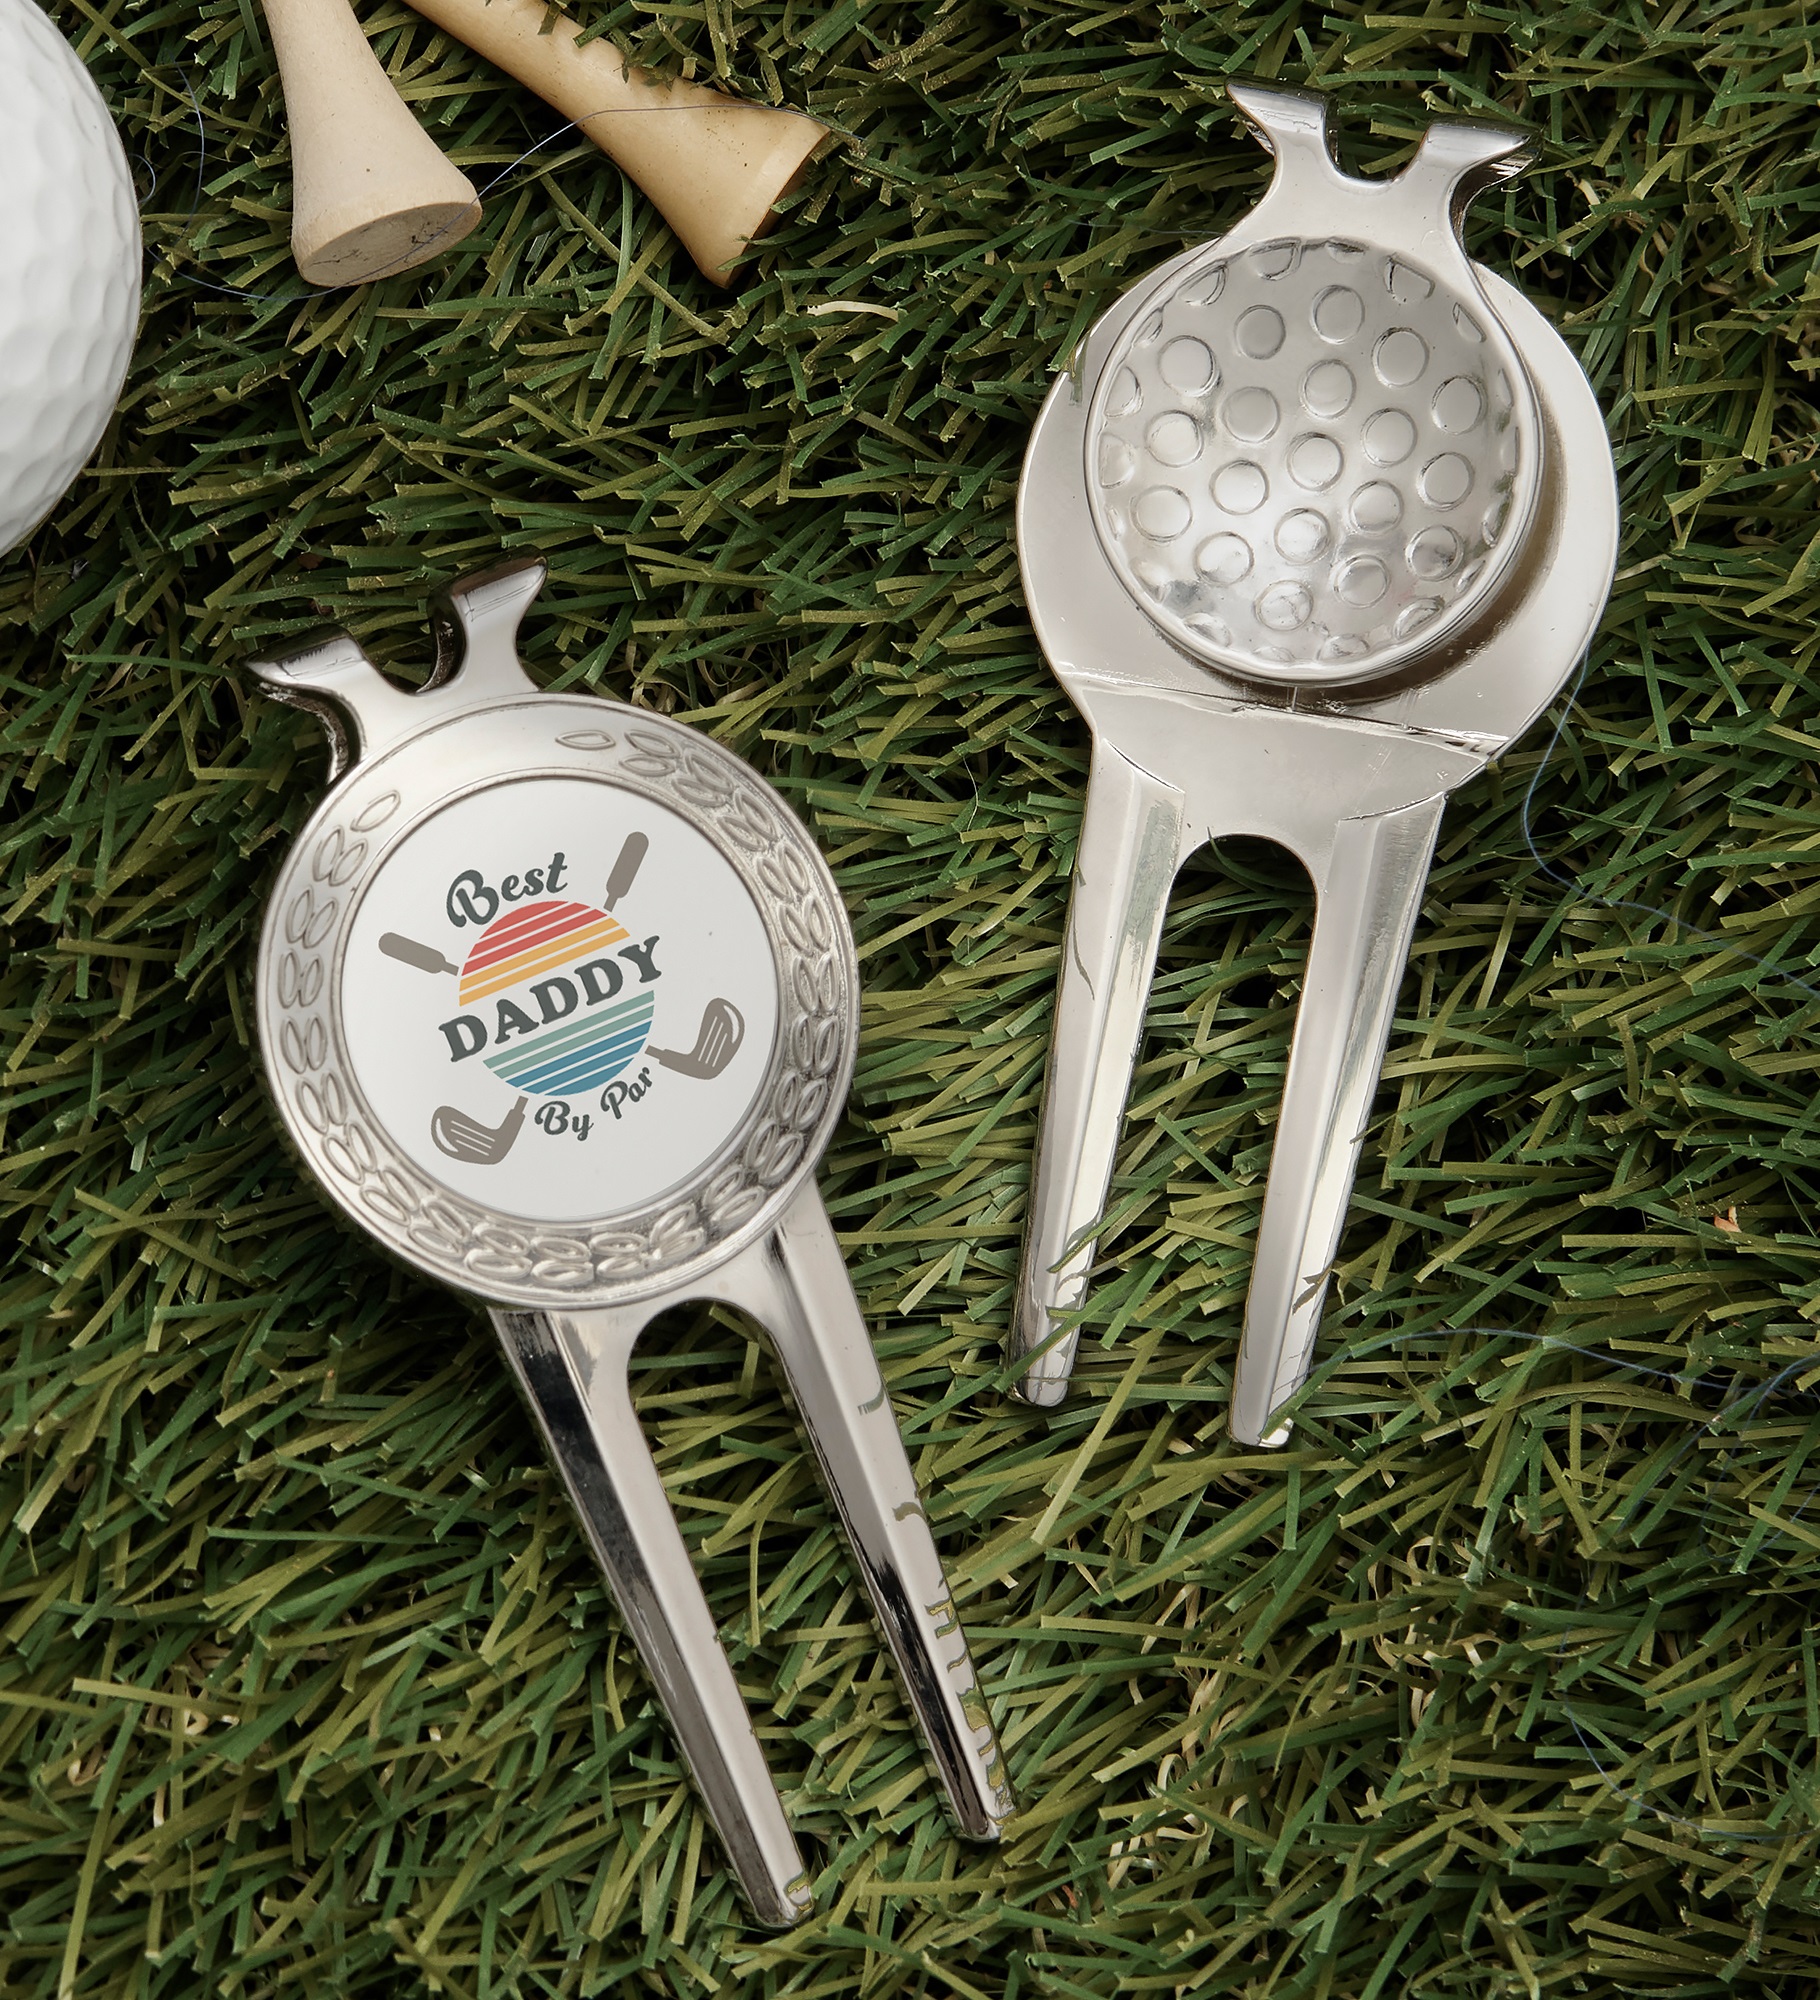 Best Dad By Par Personalized Divot Tool, Ball Marker & Clip